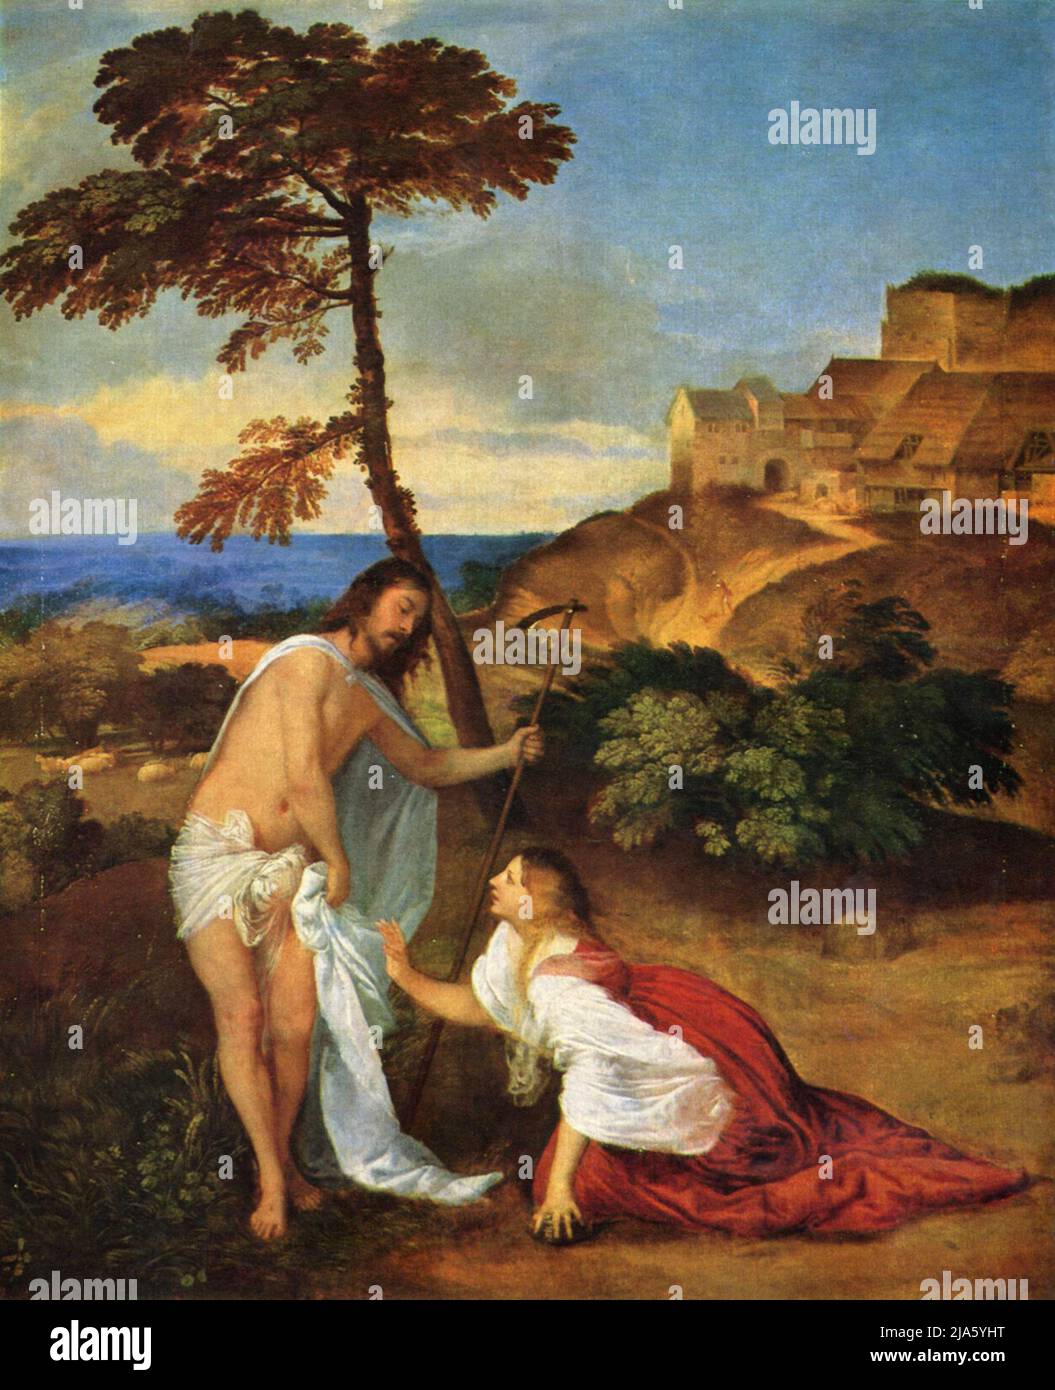 Noli me tangere (Don't touch me) by Titian. The scene shows Jesus apprearing to Mary Magdalene, but he asks her not to touch him as his ascension is not yet complete.  In John 20:1–13, Mary Magdalene sees the risen Jesus alone and he tells her 'Don't touch me, for I have not yet ascended to my father.' Stock Photo